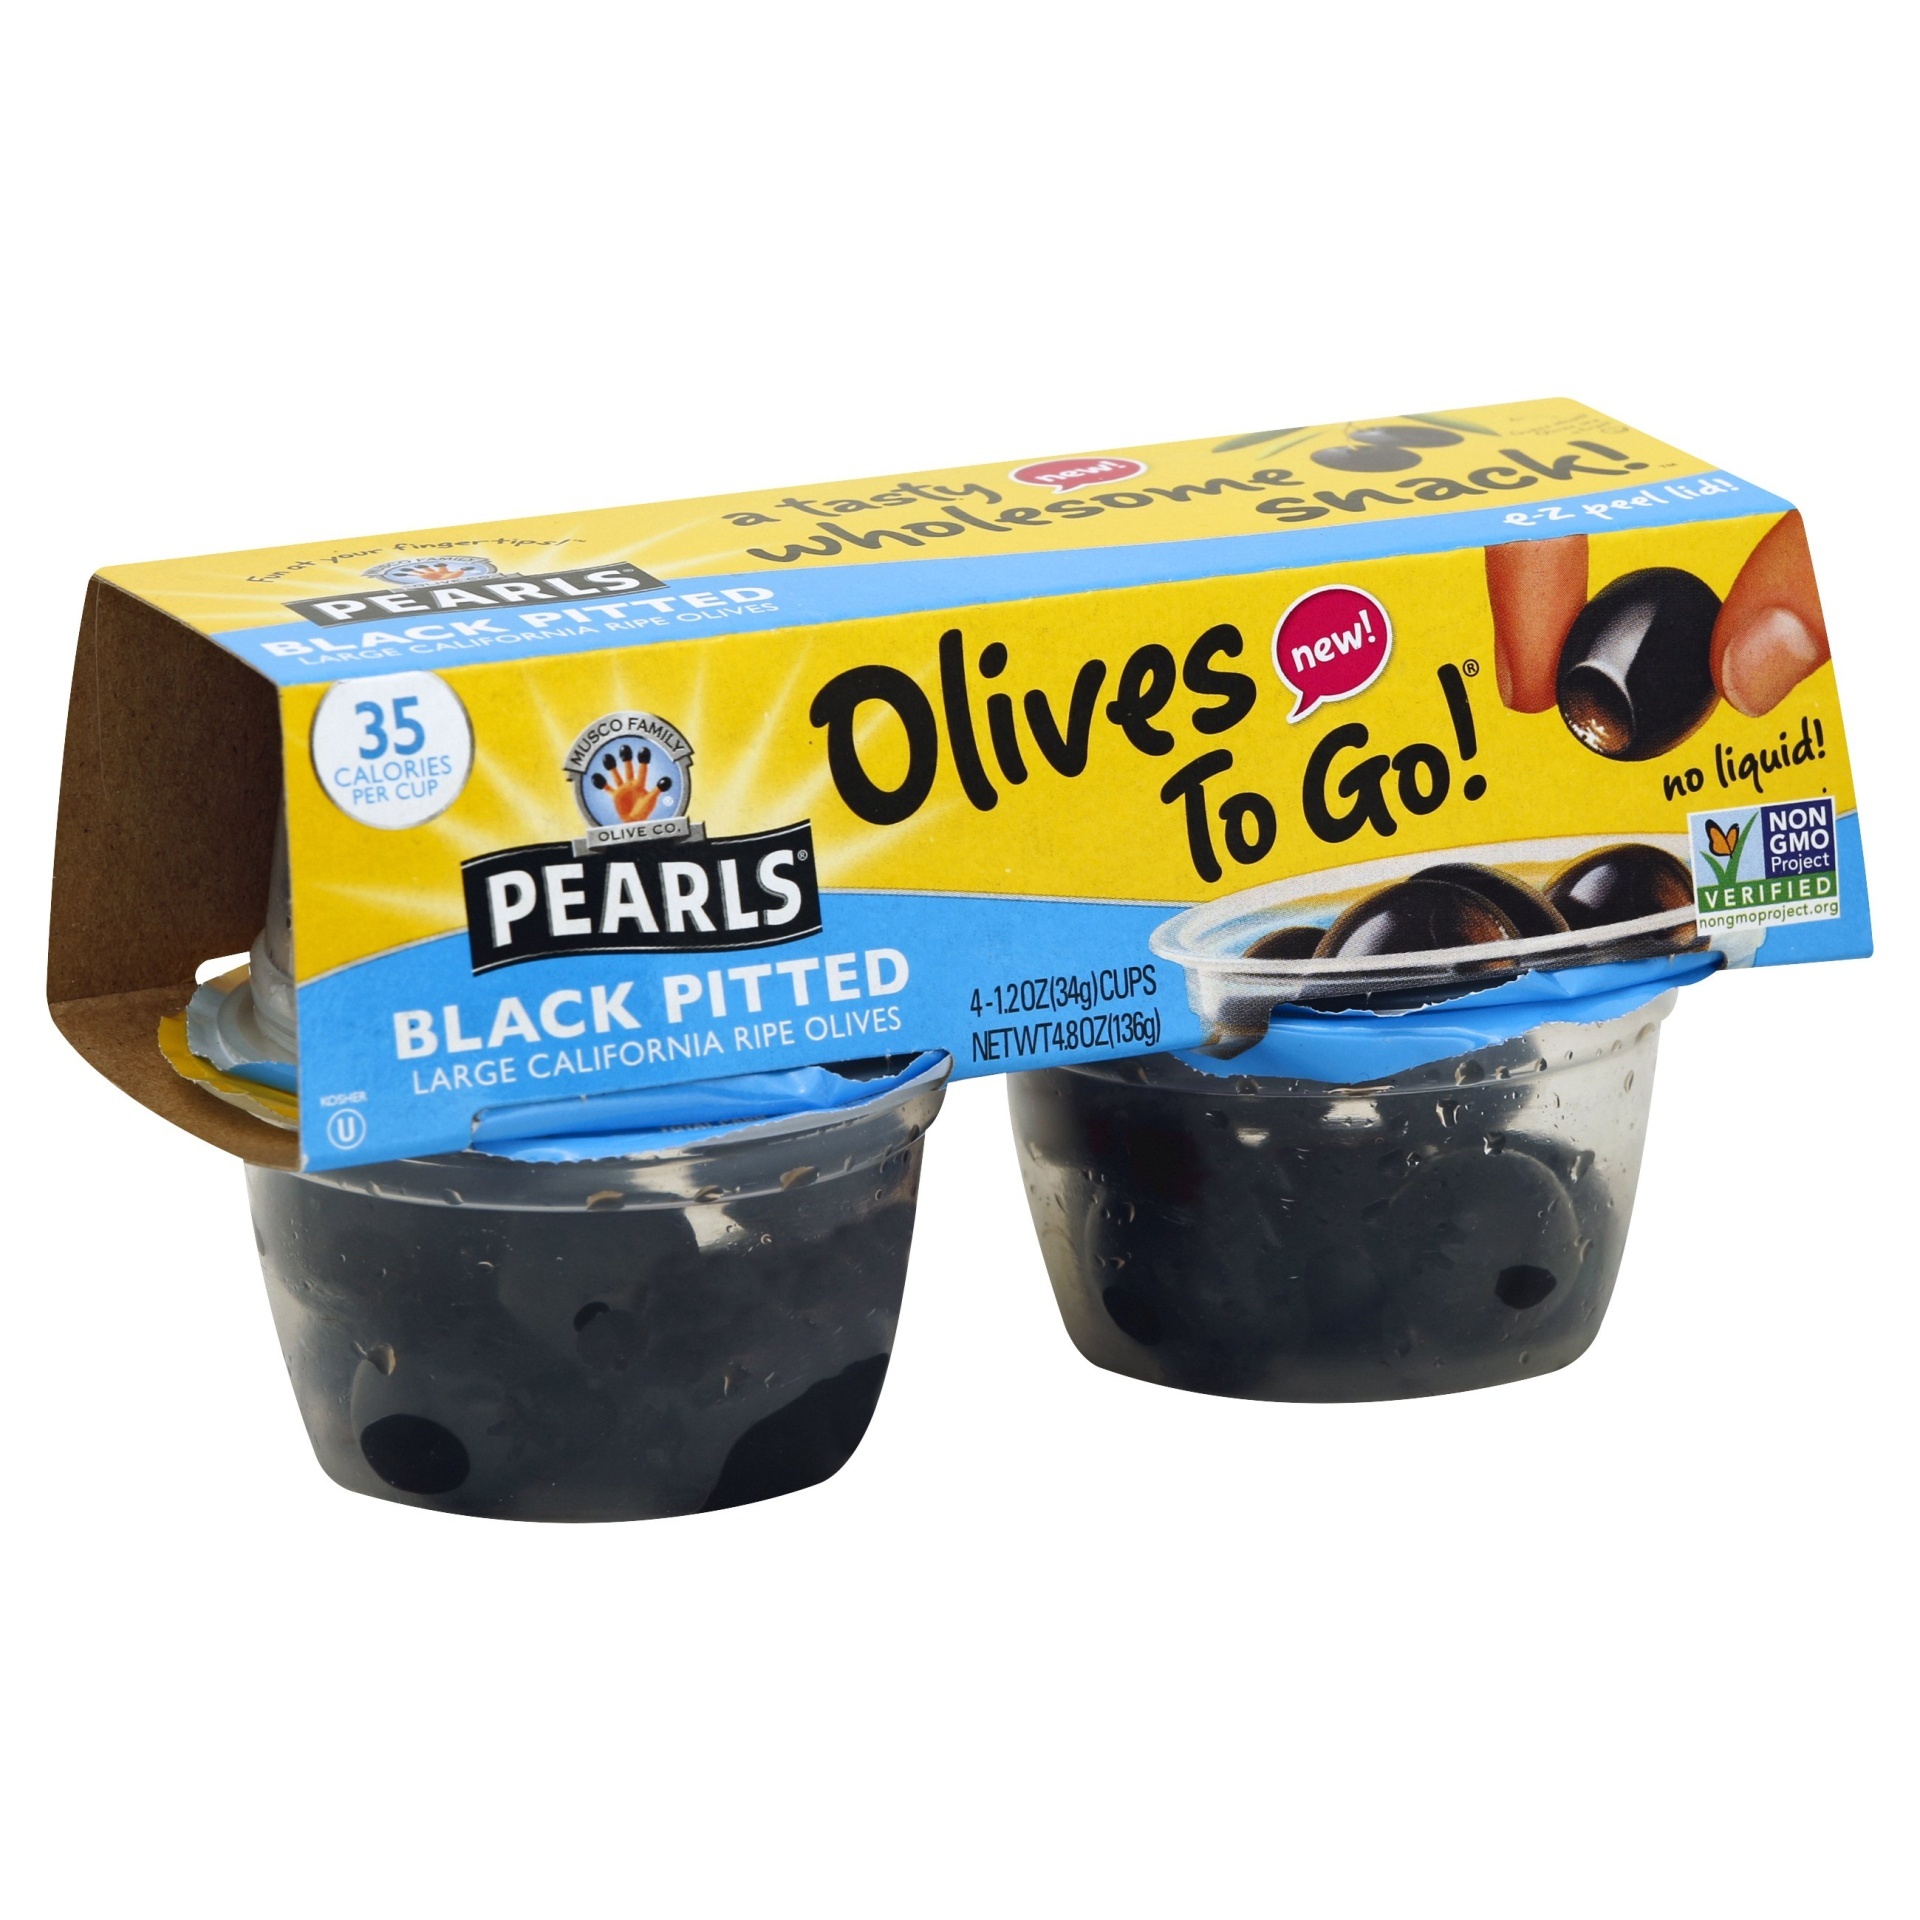 slide 1 of 3, Pearls Olives To Go! Black Pitted Large California Ripe Olives, 4 ct; 4.8 oz